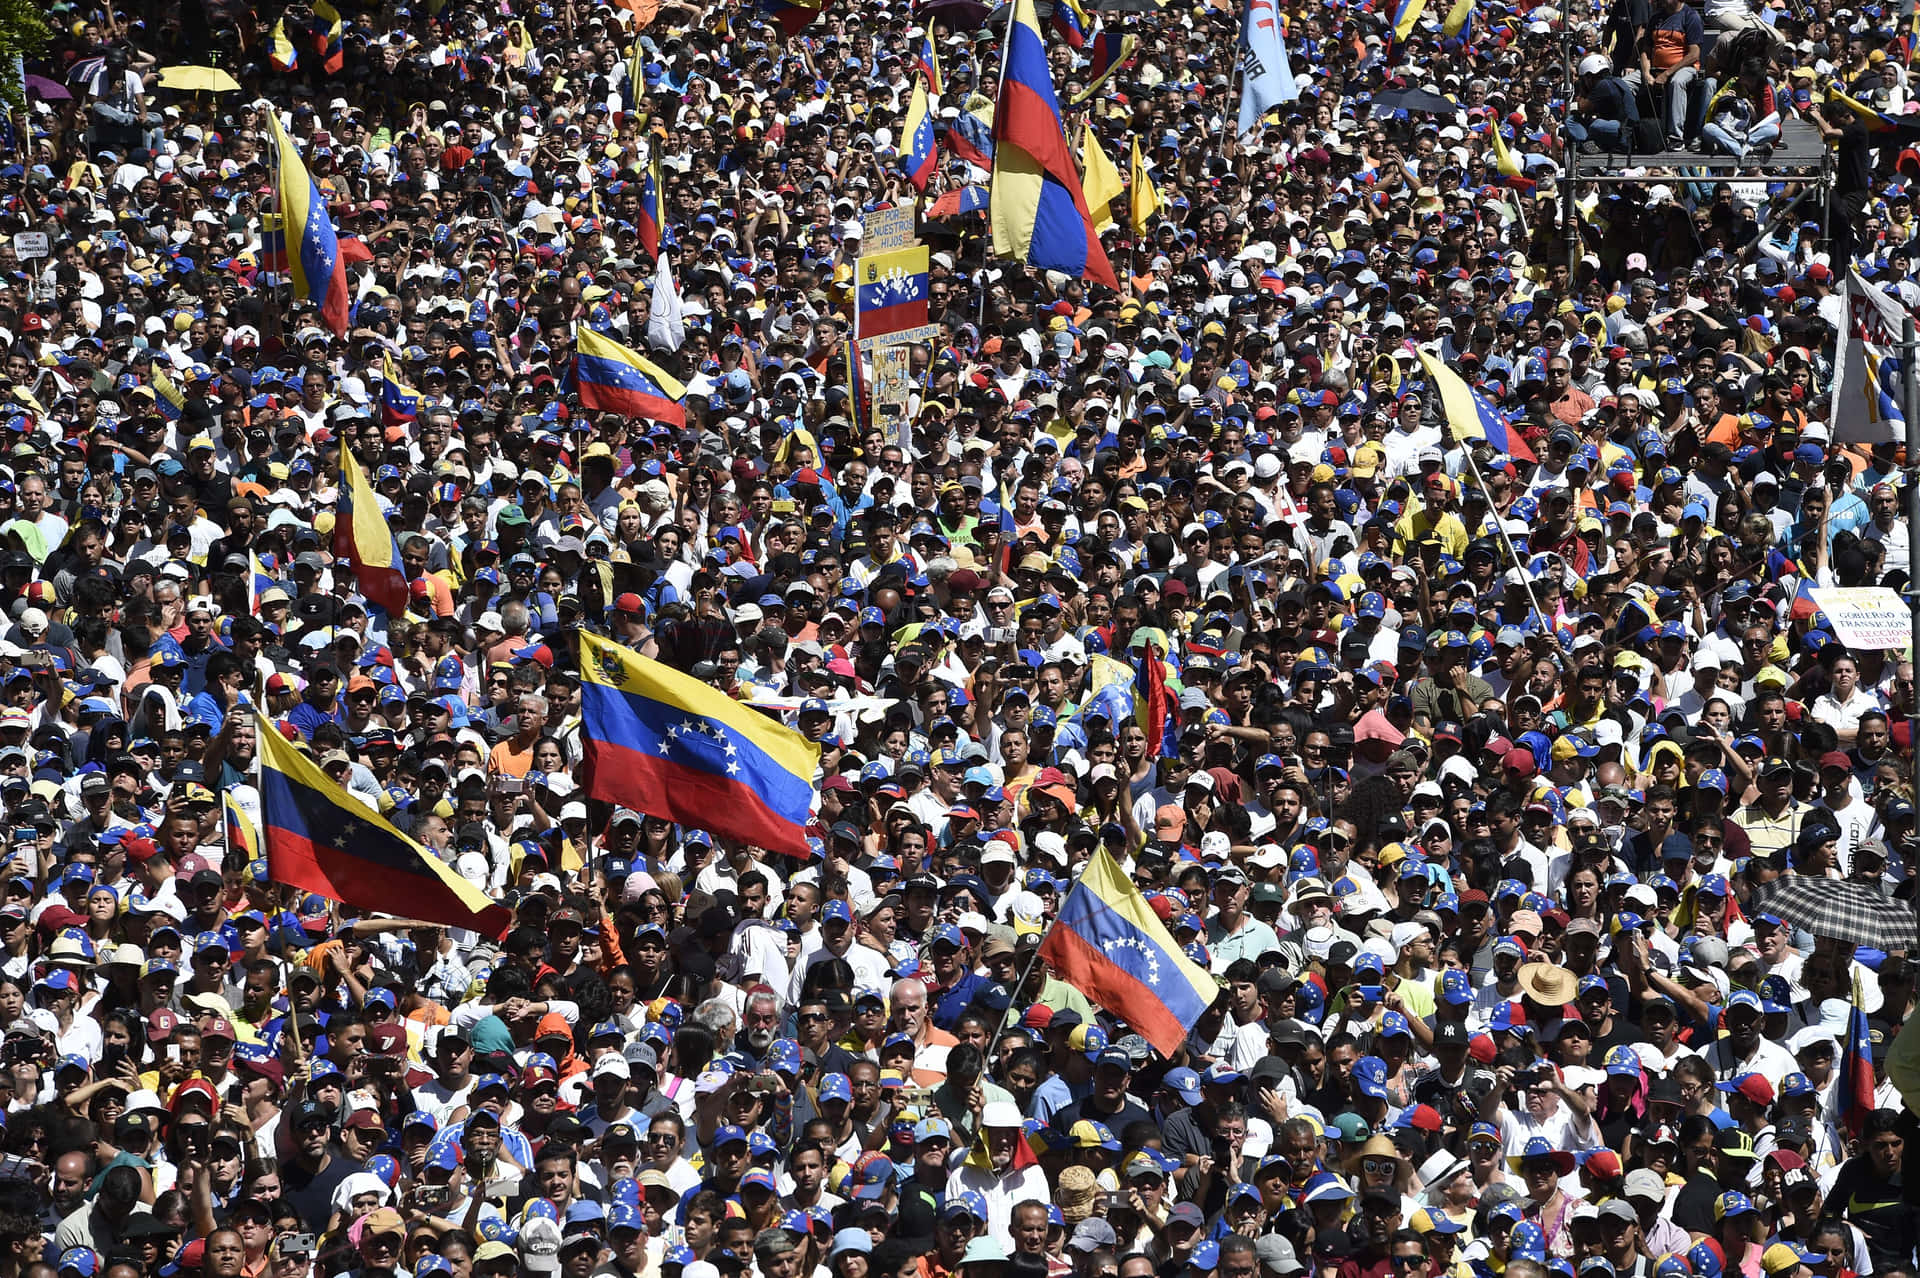 A Crowd Of People With Flags And Flags